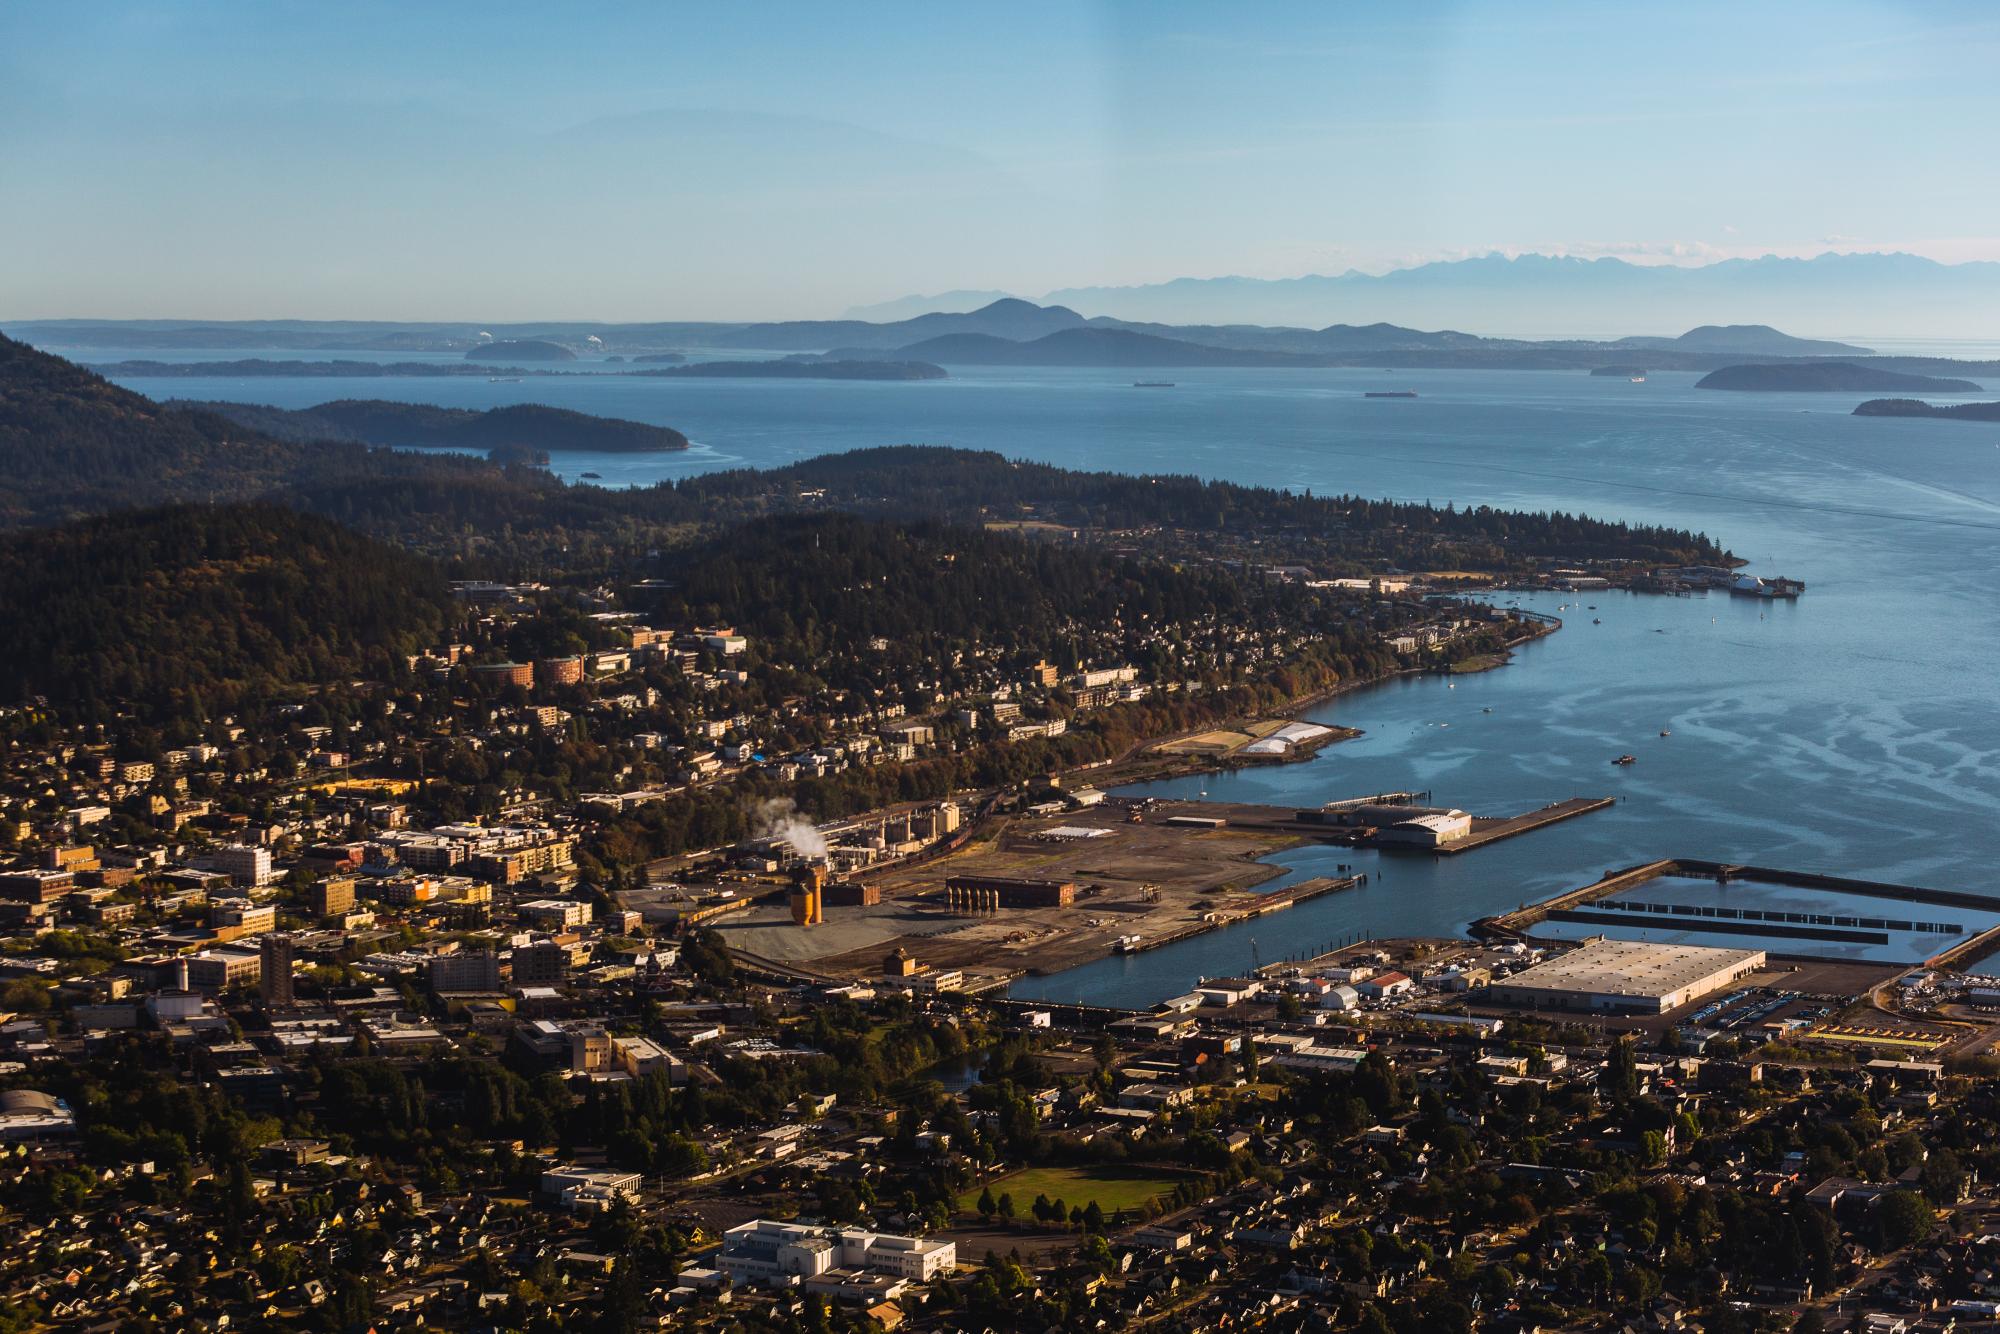 Aerial view of WWU, Bellingham, Bellingham Bay and beyond on a sunny day